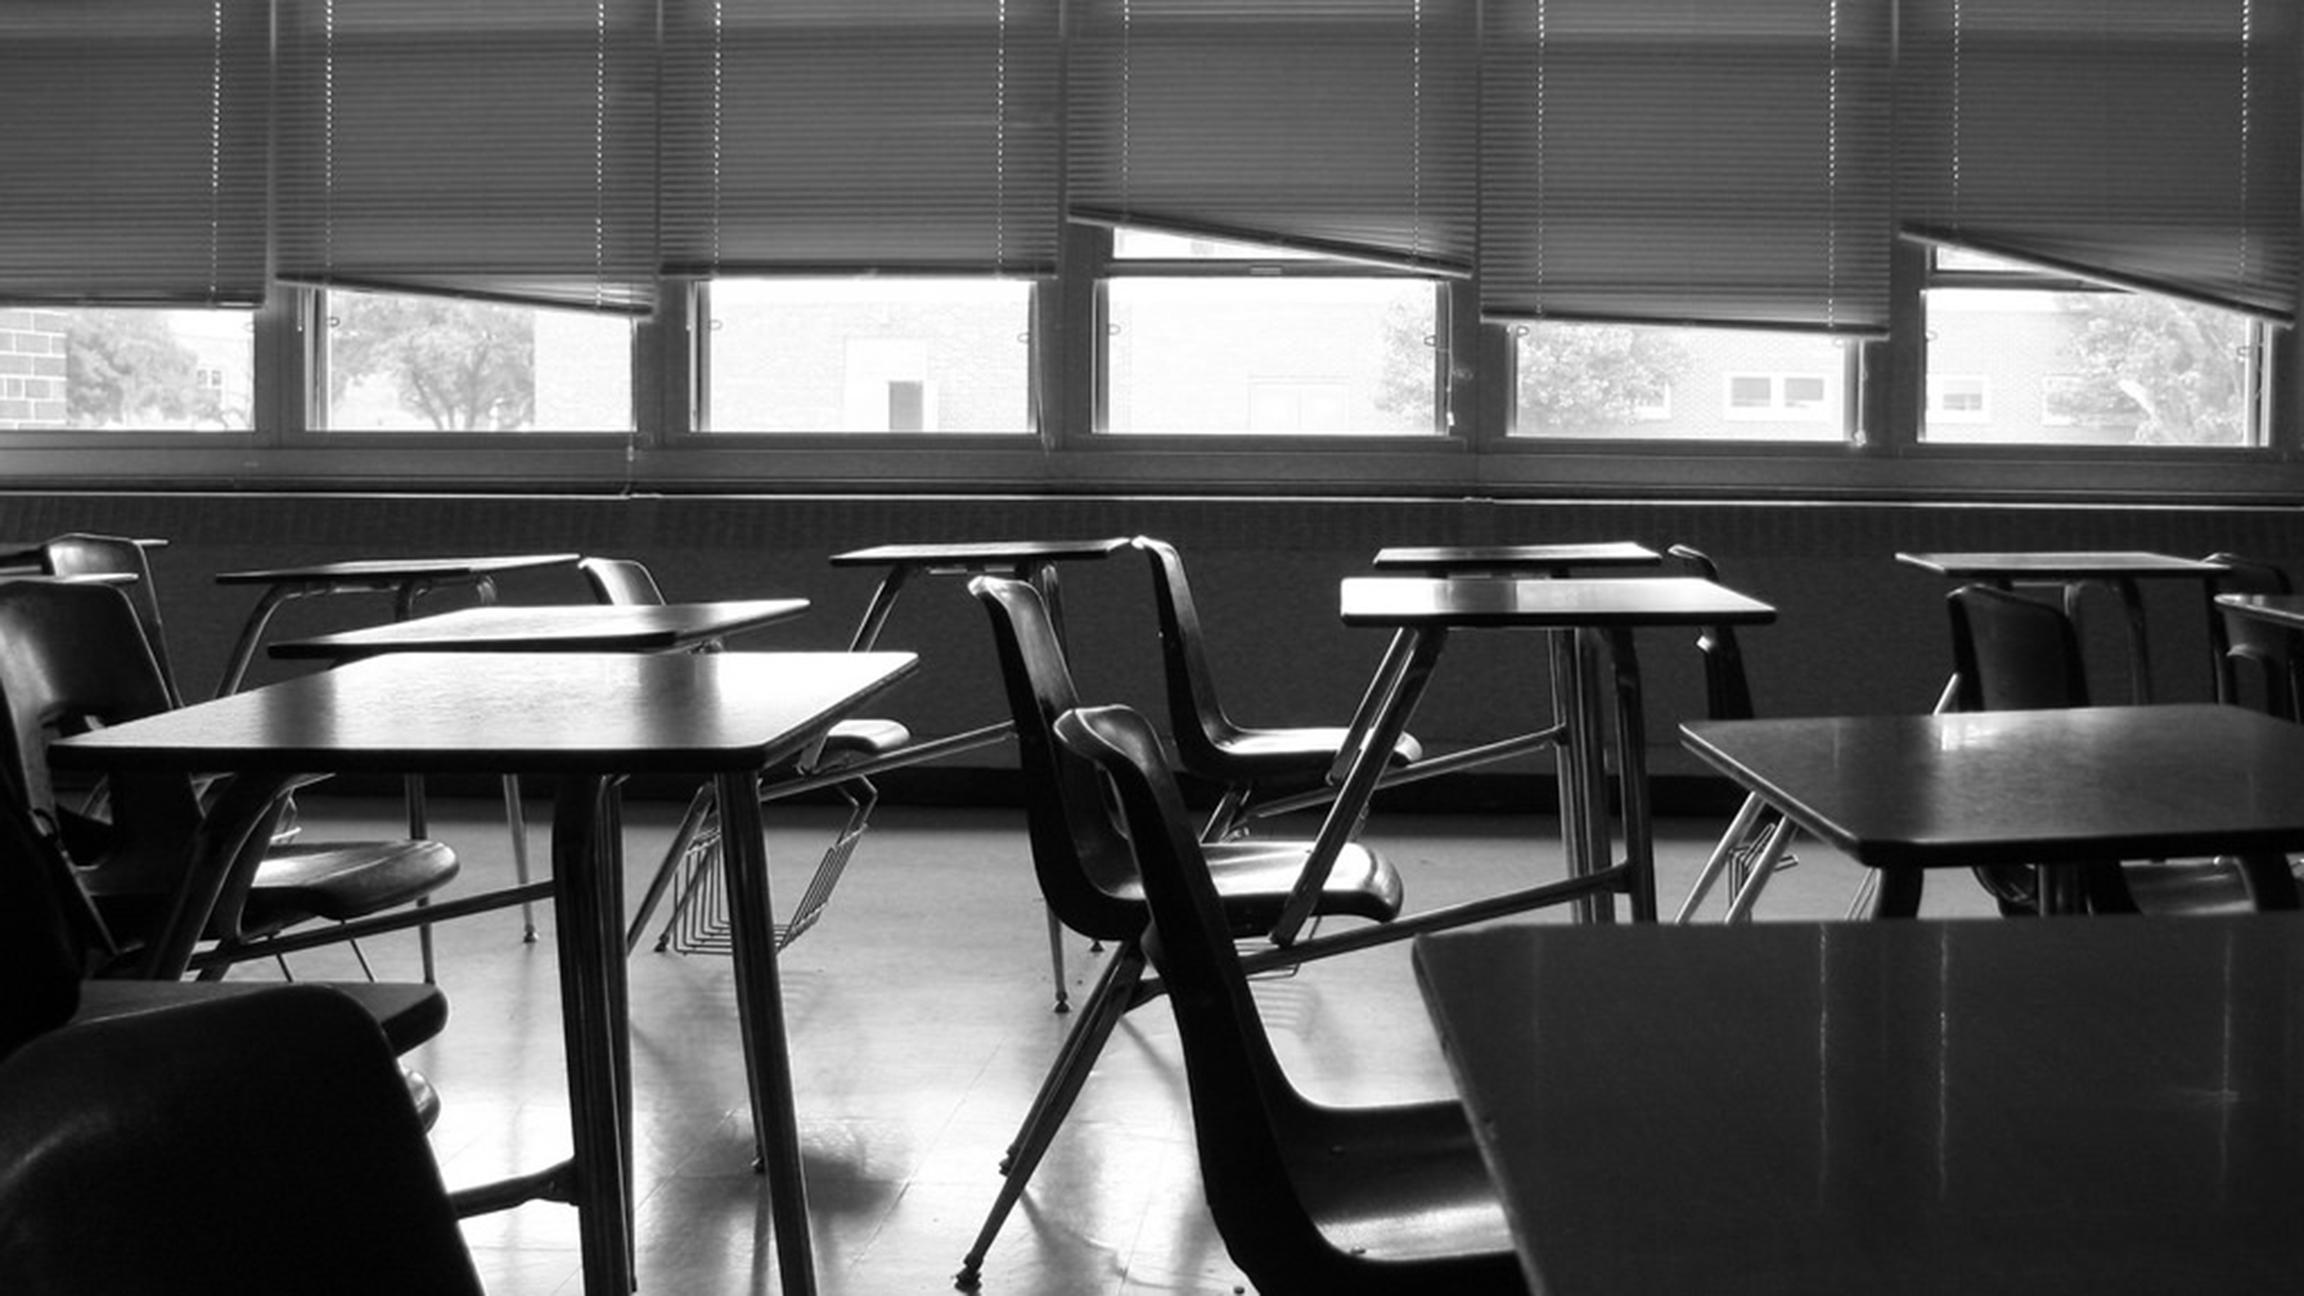 More than 96 percent of district suspensions and 99 percent of expulsions affected minority students last school year. (Max Klingensmith / Flickr)